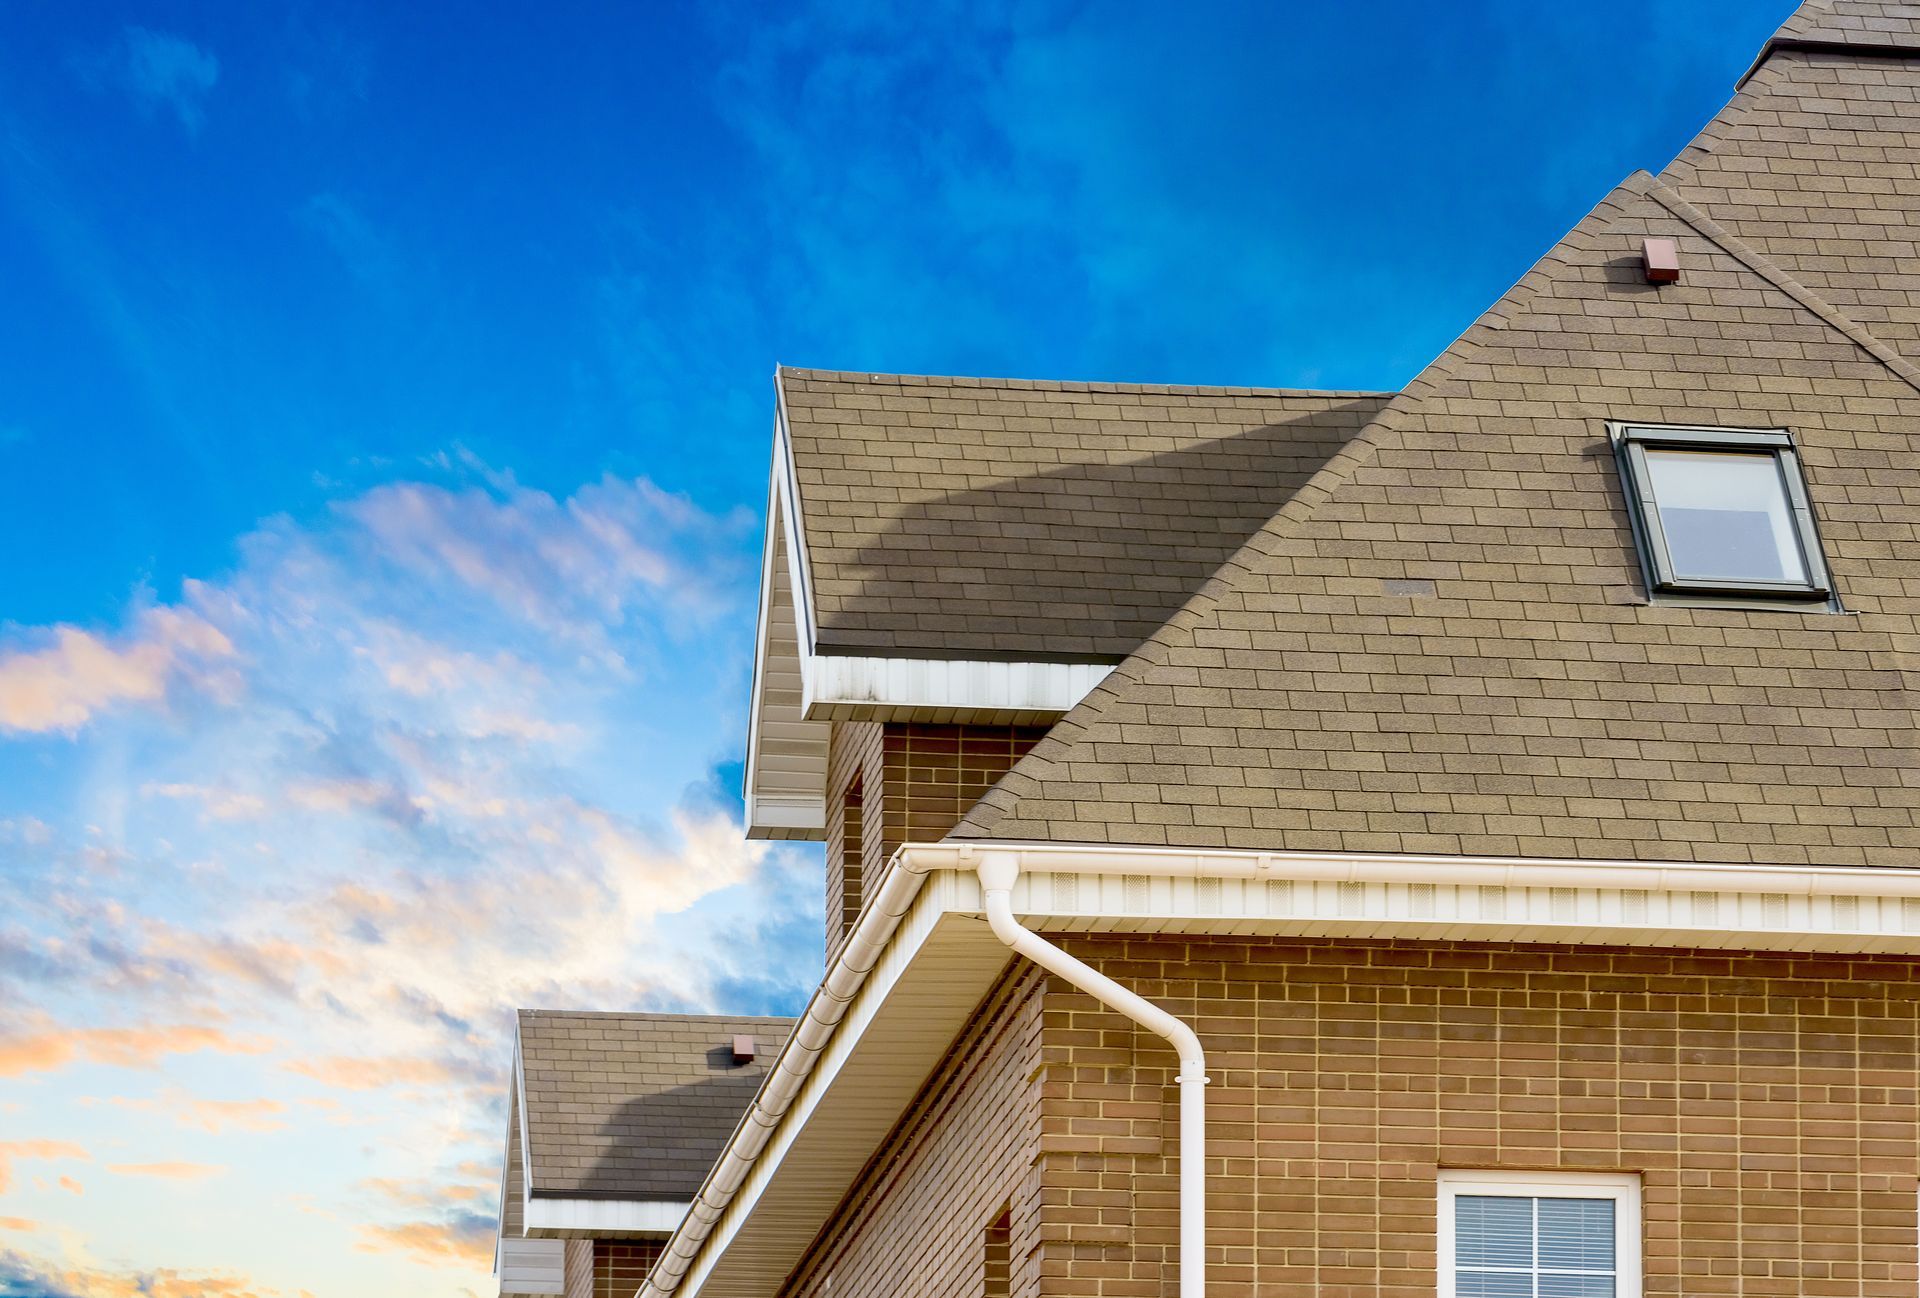 Baton Rouge Roofing: Maintain Your Roof to Cut Energy Costs